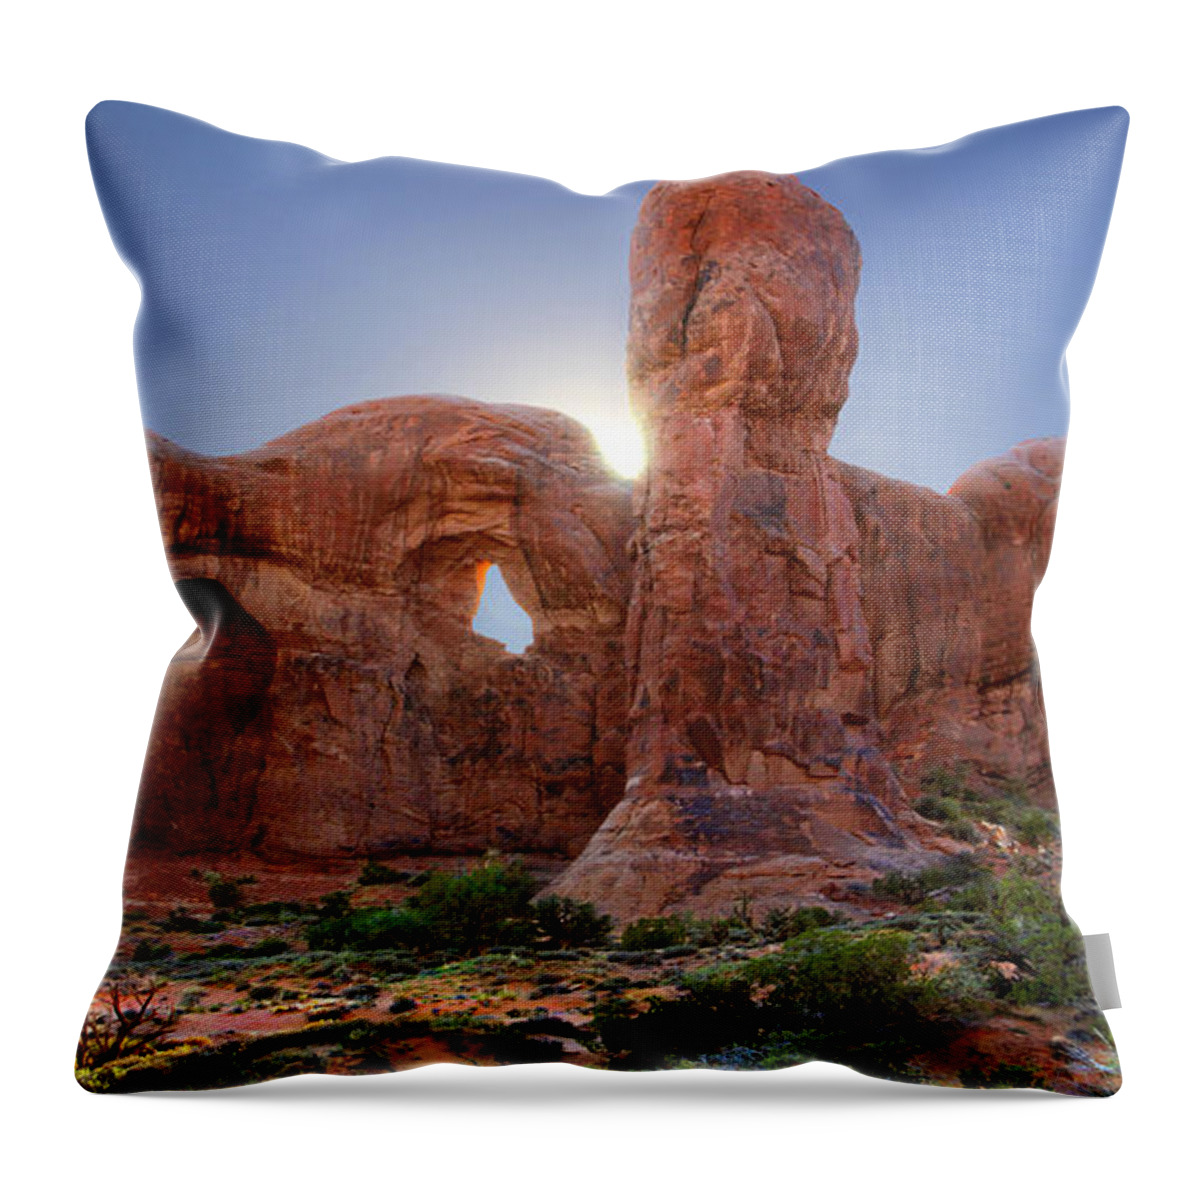 Desert Throw Pillow featuring the photograph Parade of Elephants in Arches National Park by Mike McGlothlen